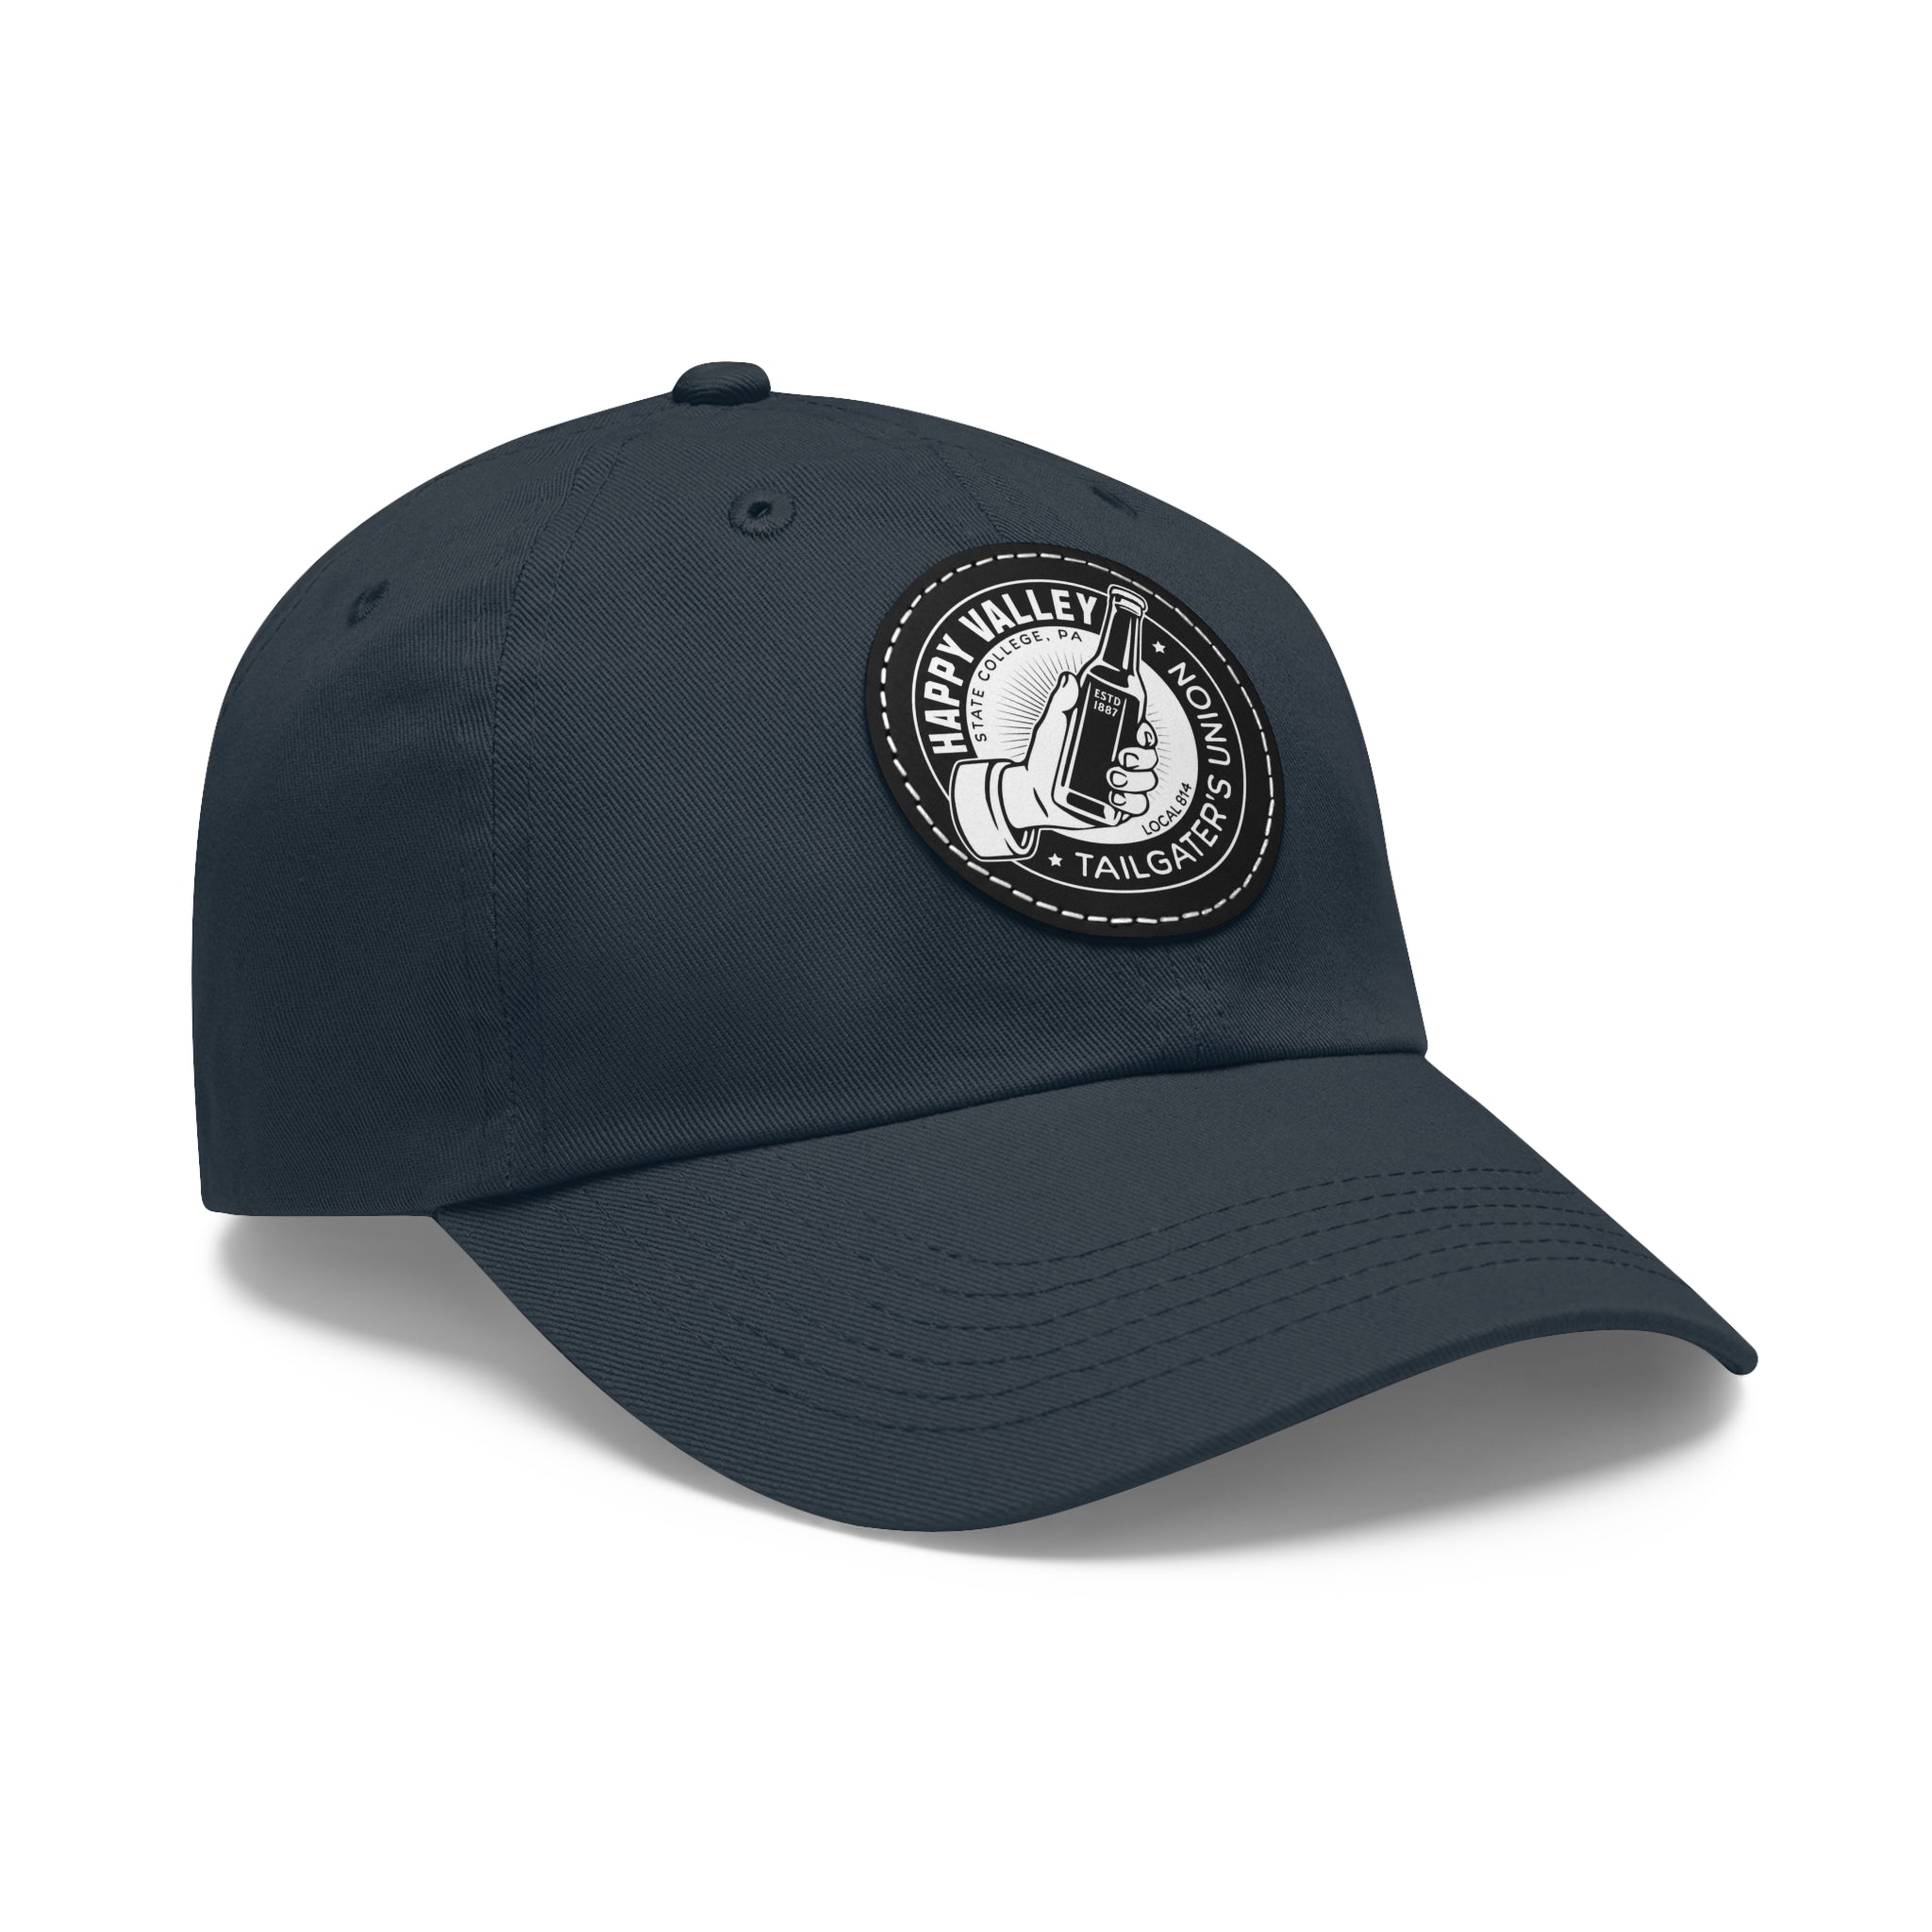 Happy Valley Tailgater's Union - Printed Patch Dad Hat - Yinzylvania